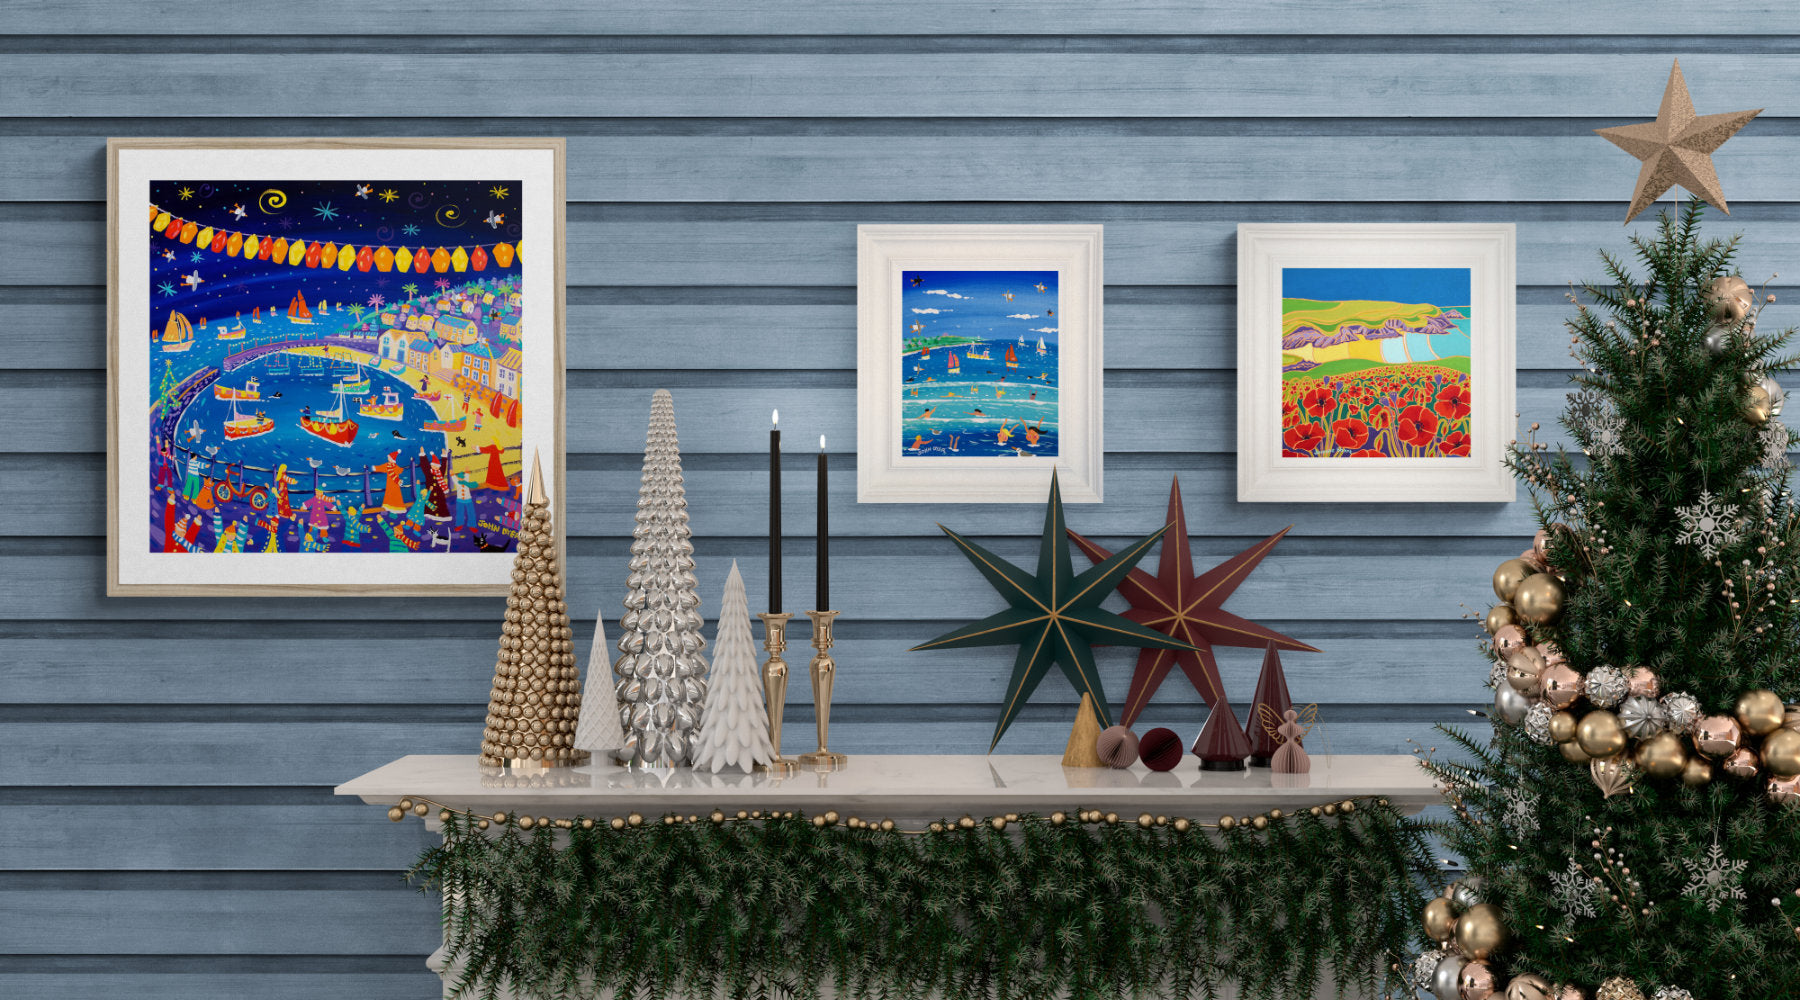 Art for Christmas - art prints and original paintings in a Christmas room setting - John Dyer Gallery